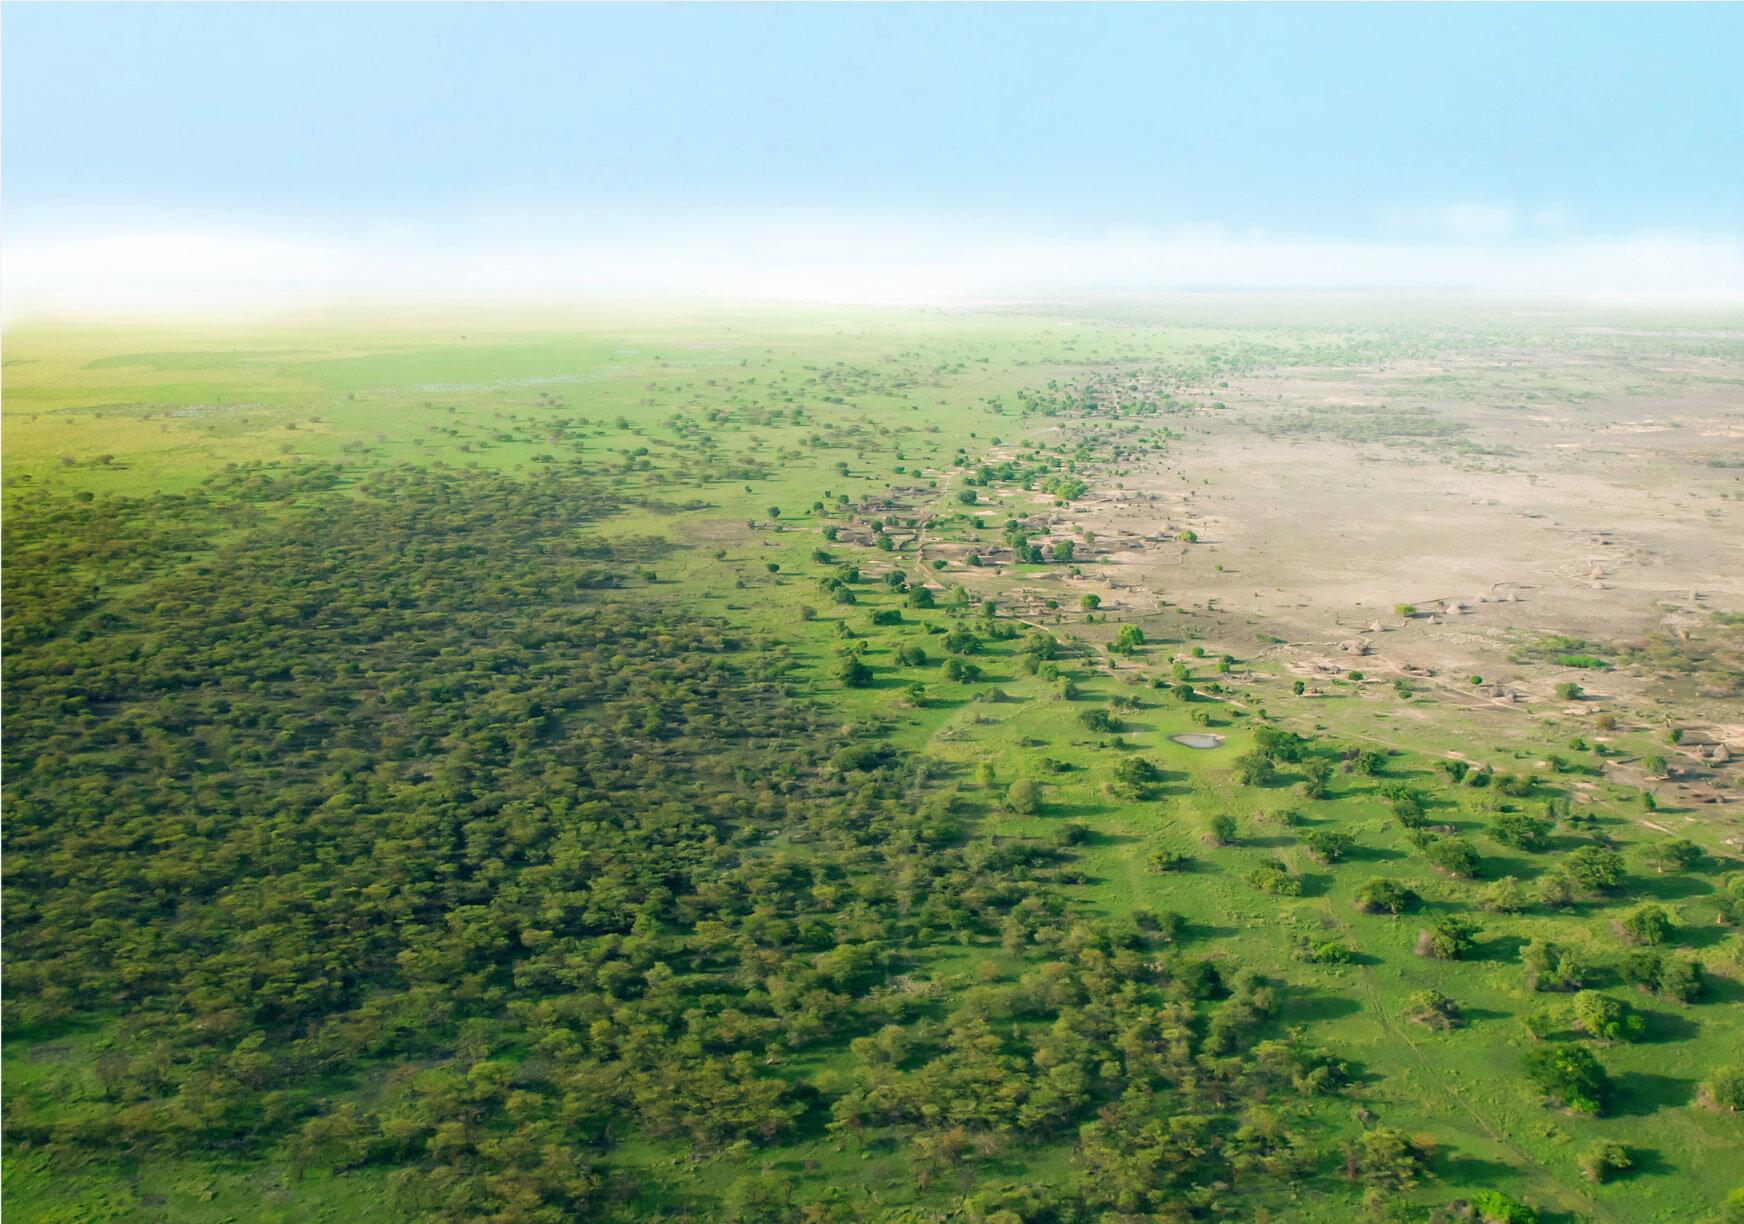 Progress accelerated but targeted action needed to realize Africa’s Great Green Wall ambition.